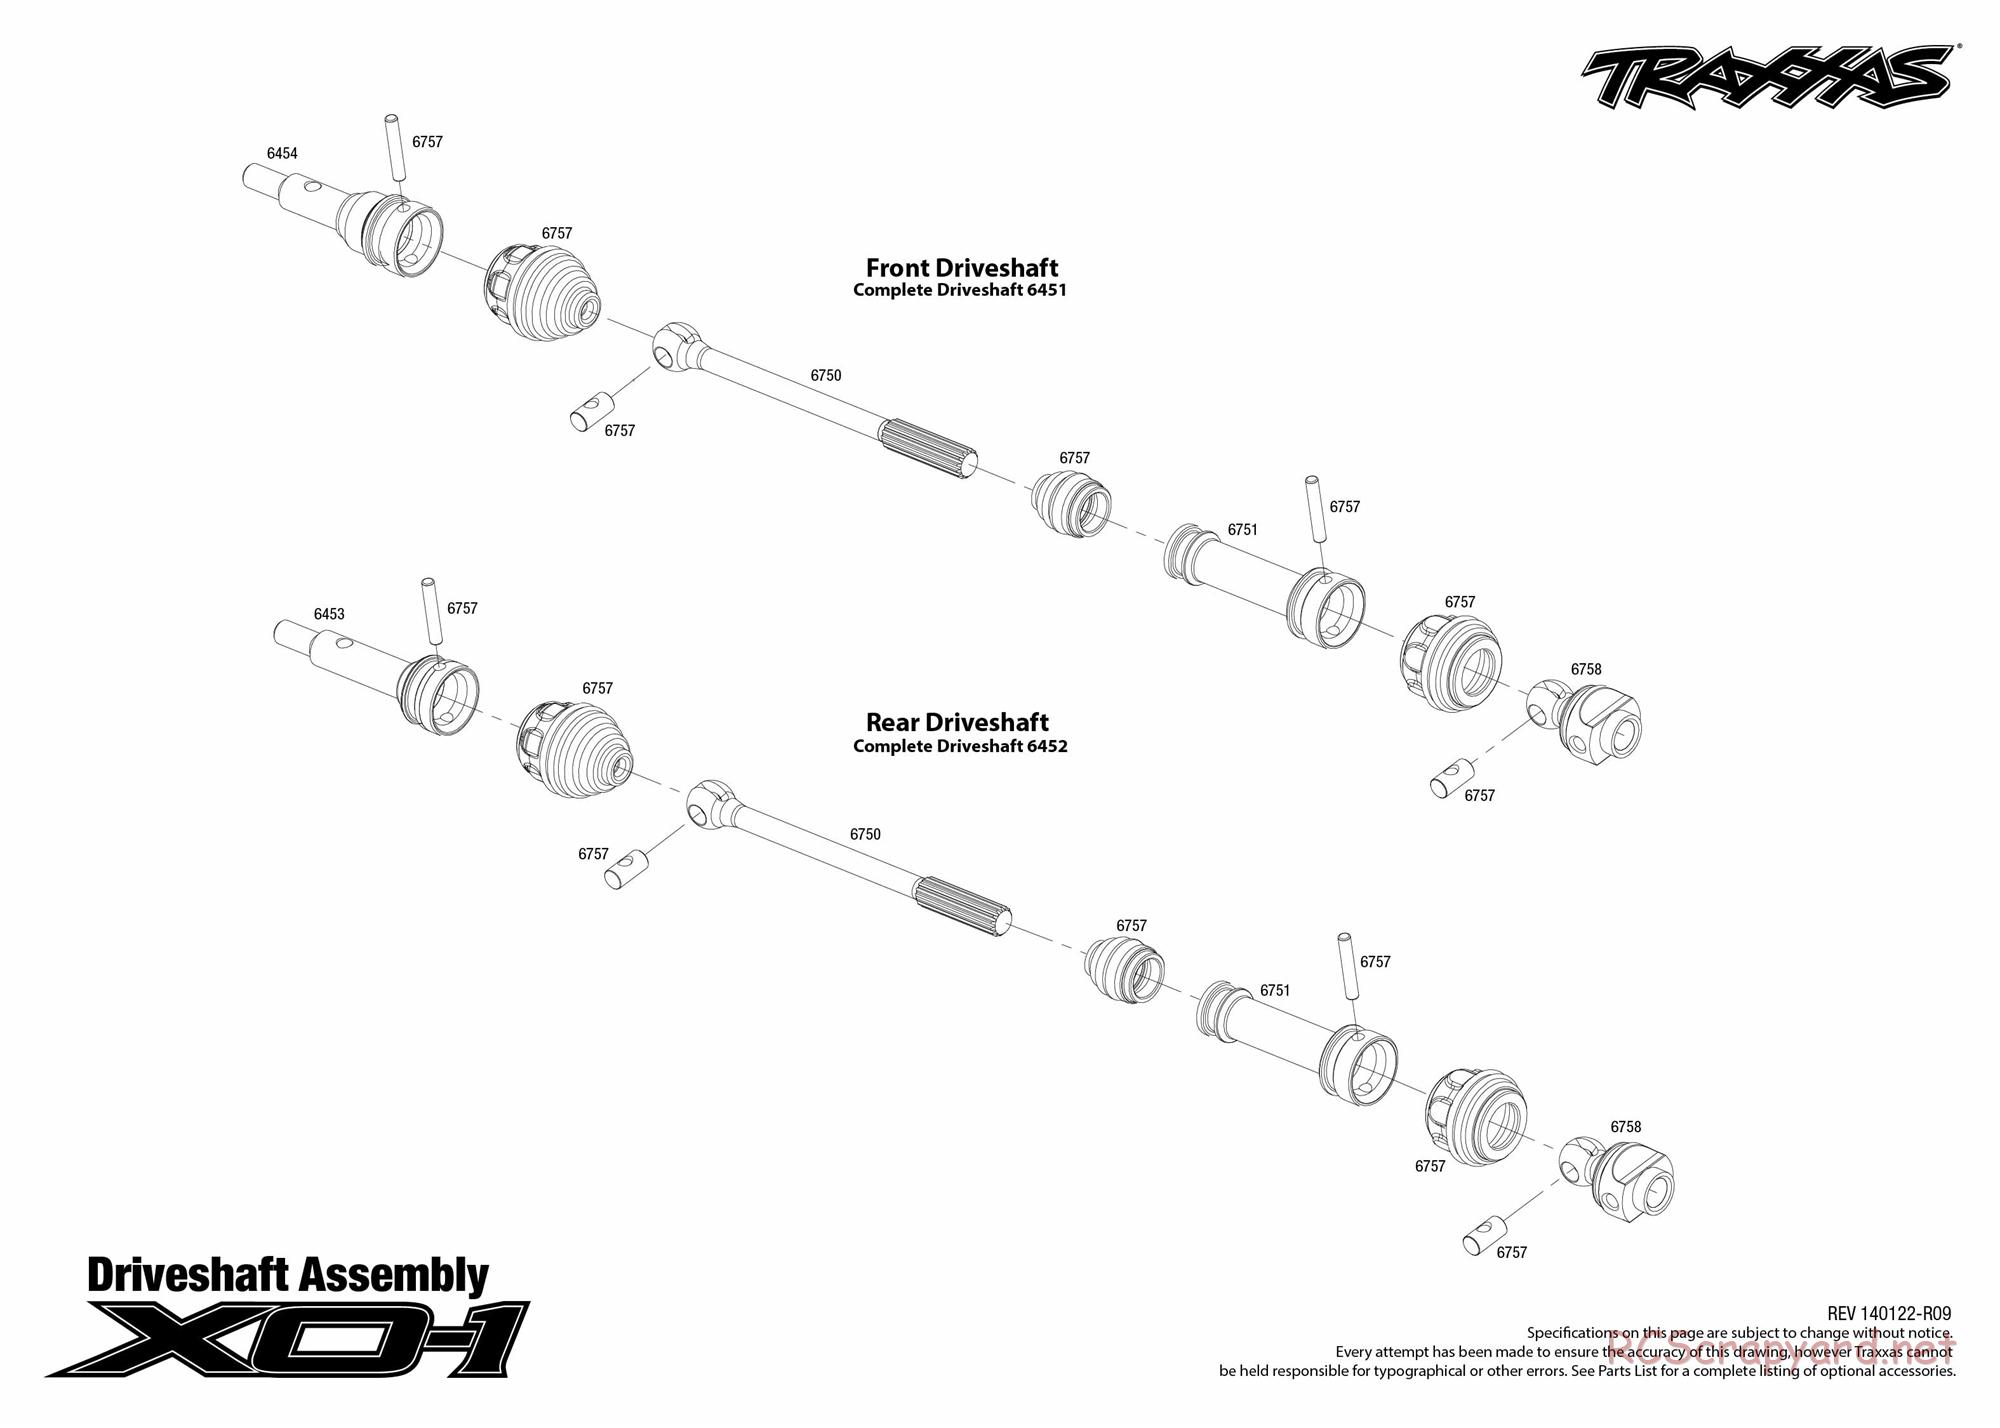 Traxxas - XO-1 (2011) - Exploded Views - Page 2